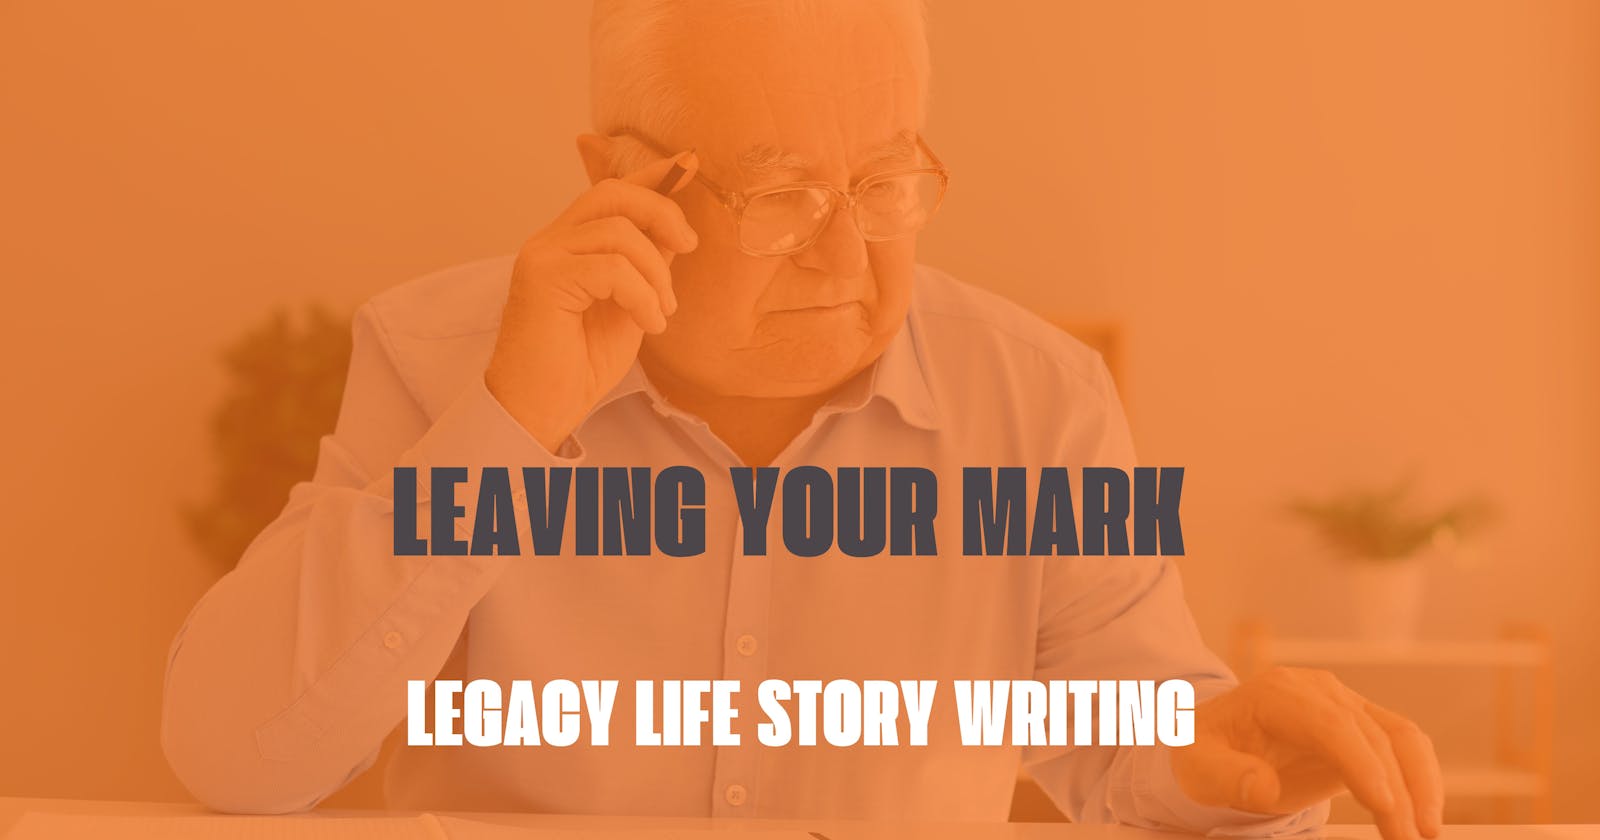 Leaving Your Mark: Legacy Life Story Writing